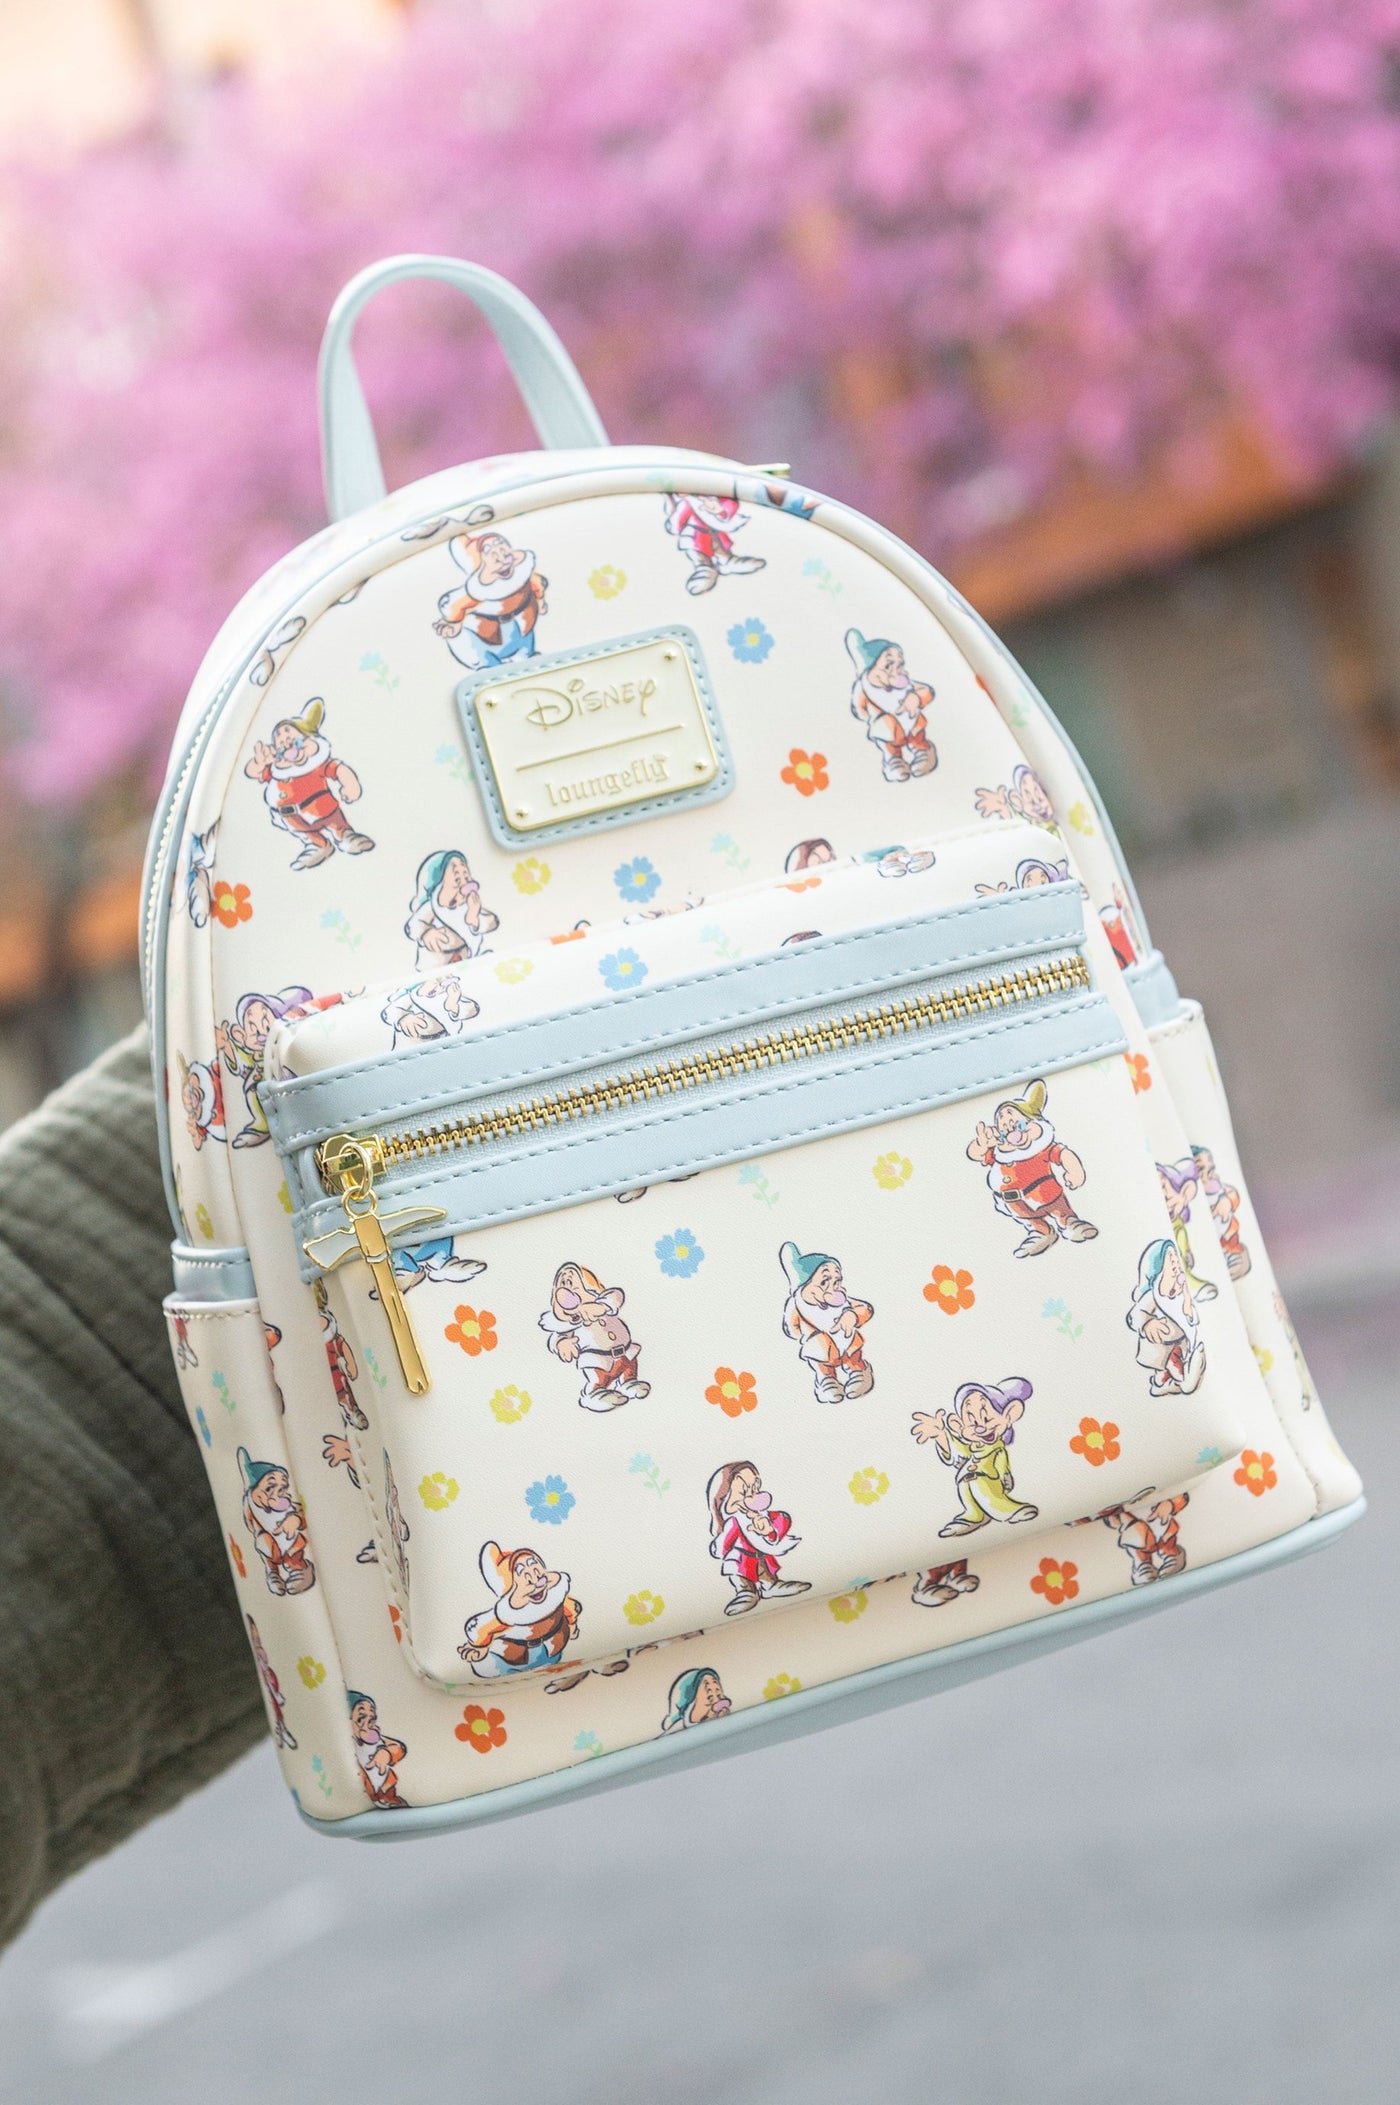 707 Street Exclusive - Loungefly Disney Snow White and the Seven Dwarfs Blue Mini Backpack - IRL Front